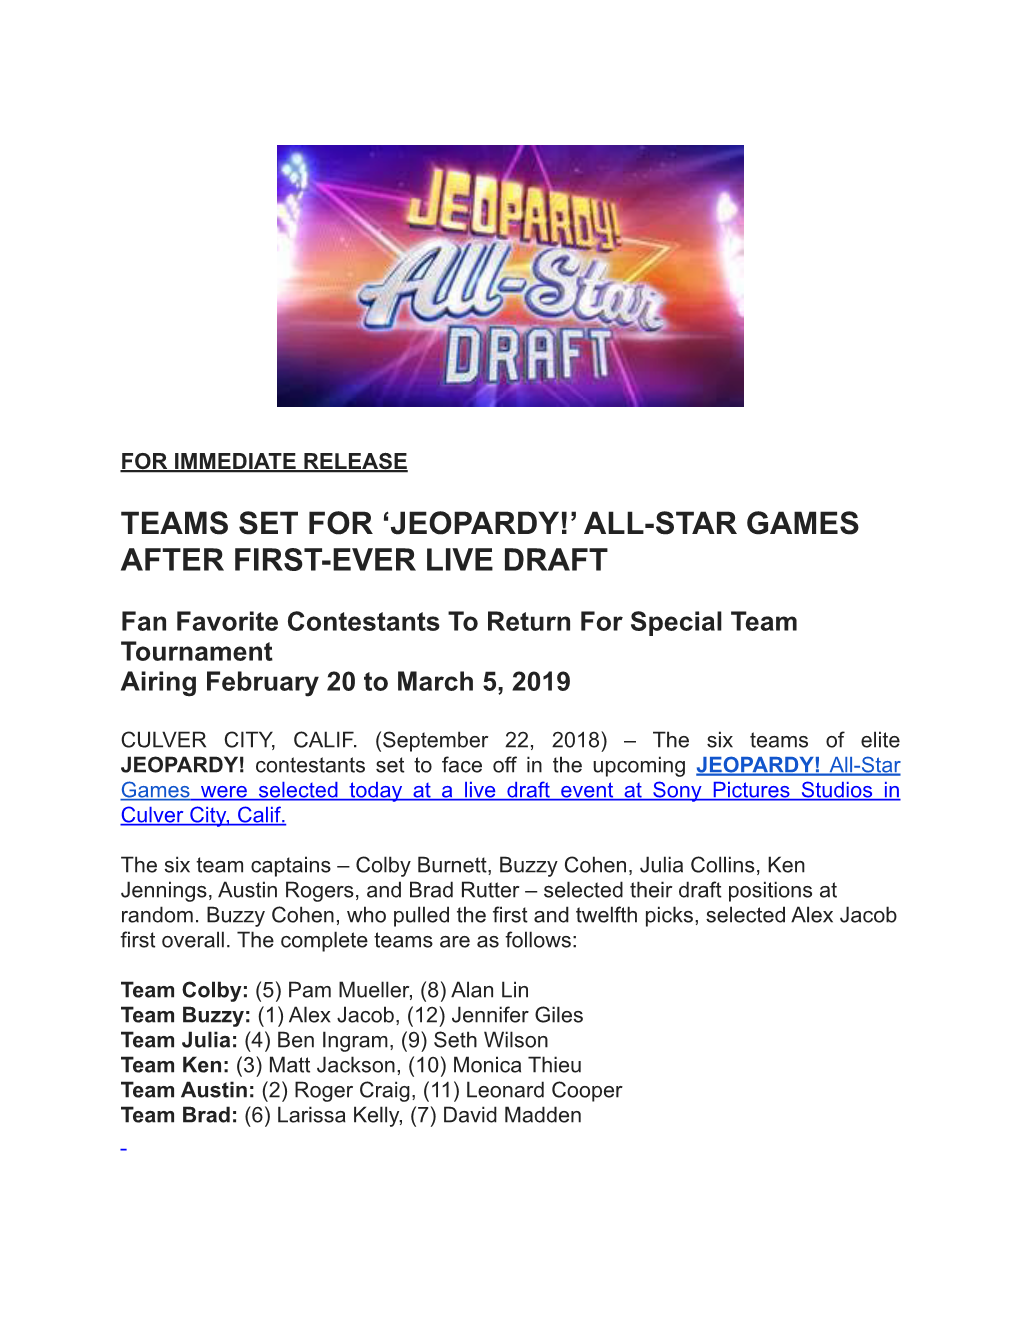 Teams Set for 'Jeopardy!' All-Star Games After First